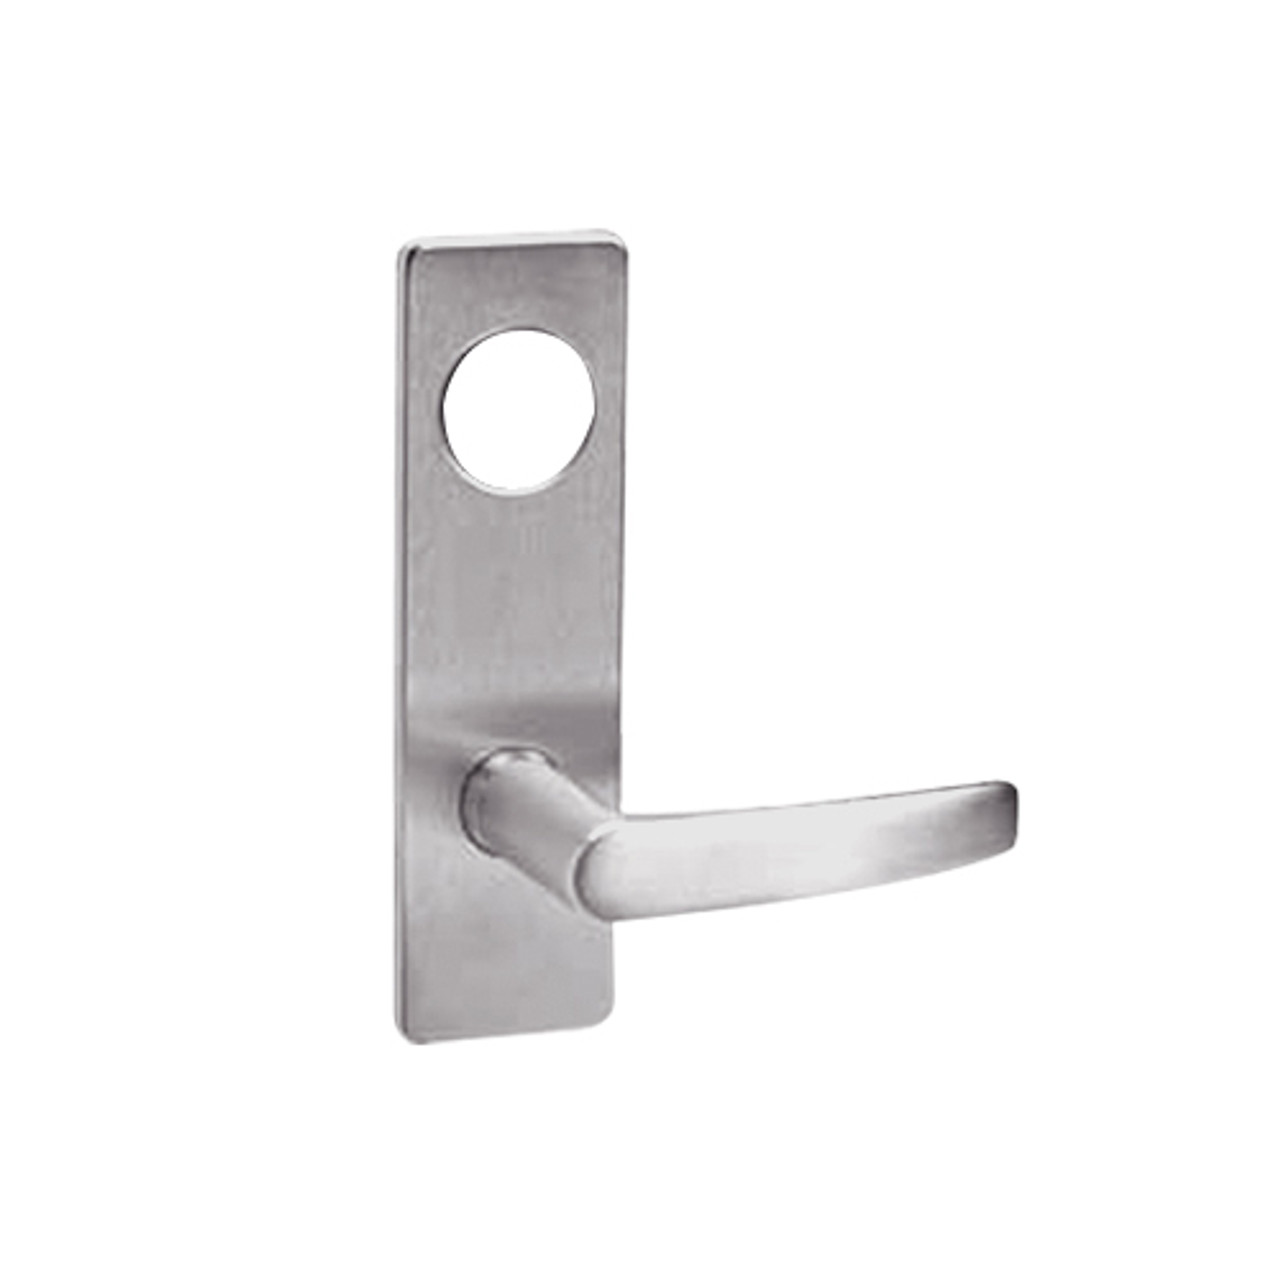 ML2055-ASN-630-LC Corbin Russwin ML2000 Series Mortise Classroom Locksets with Armstrong Lever in Satin Stainless